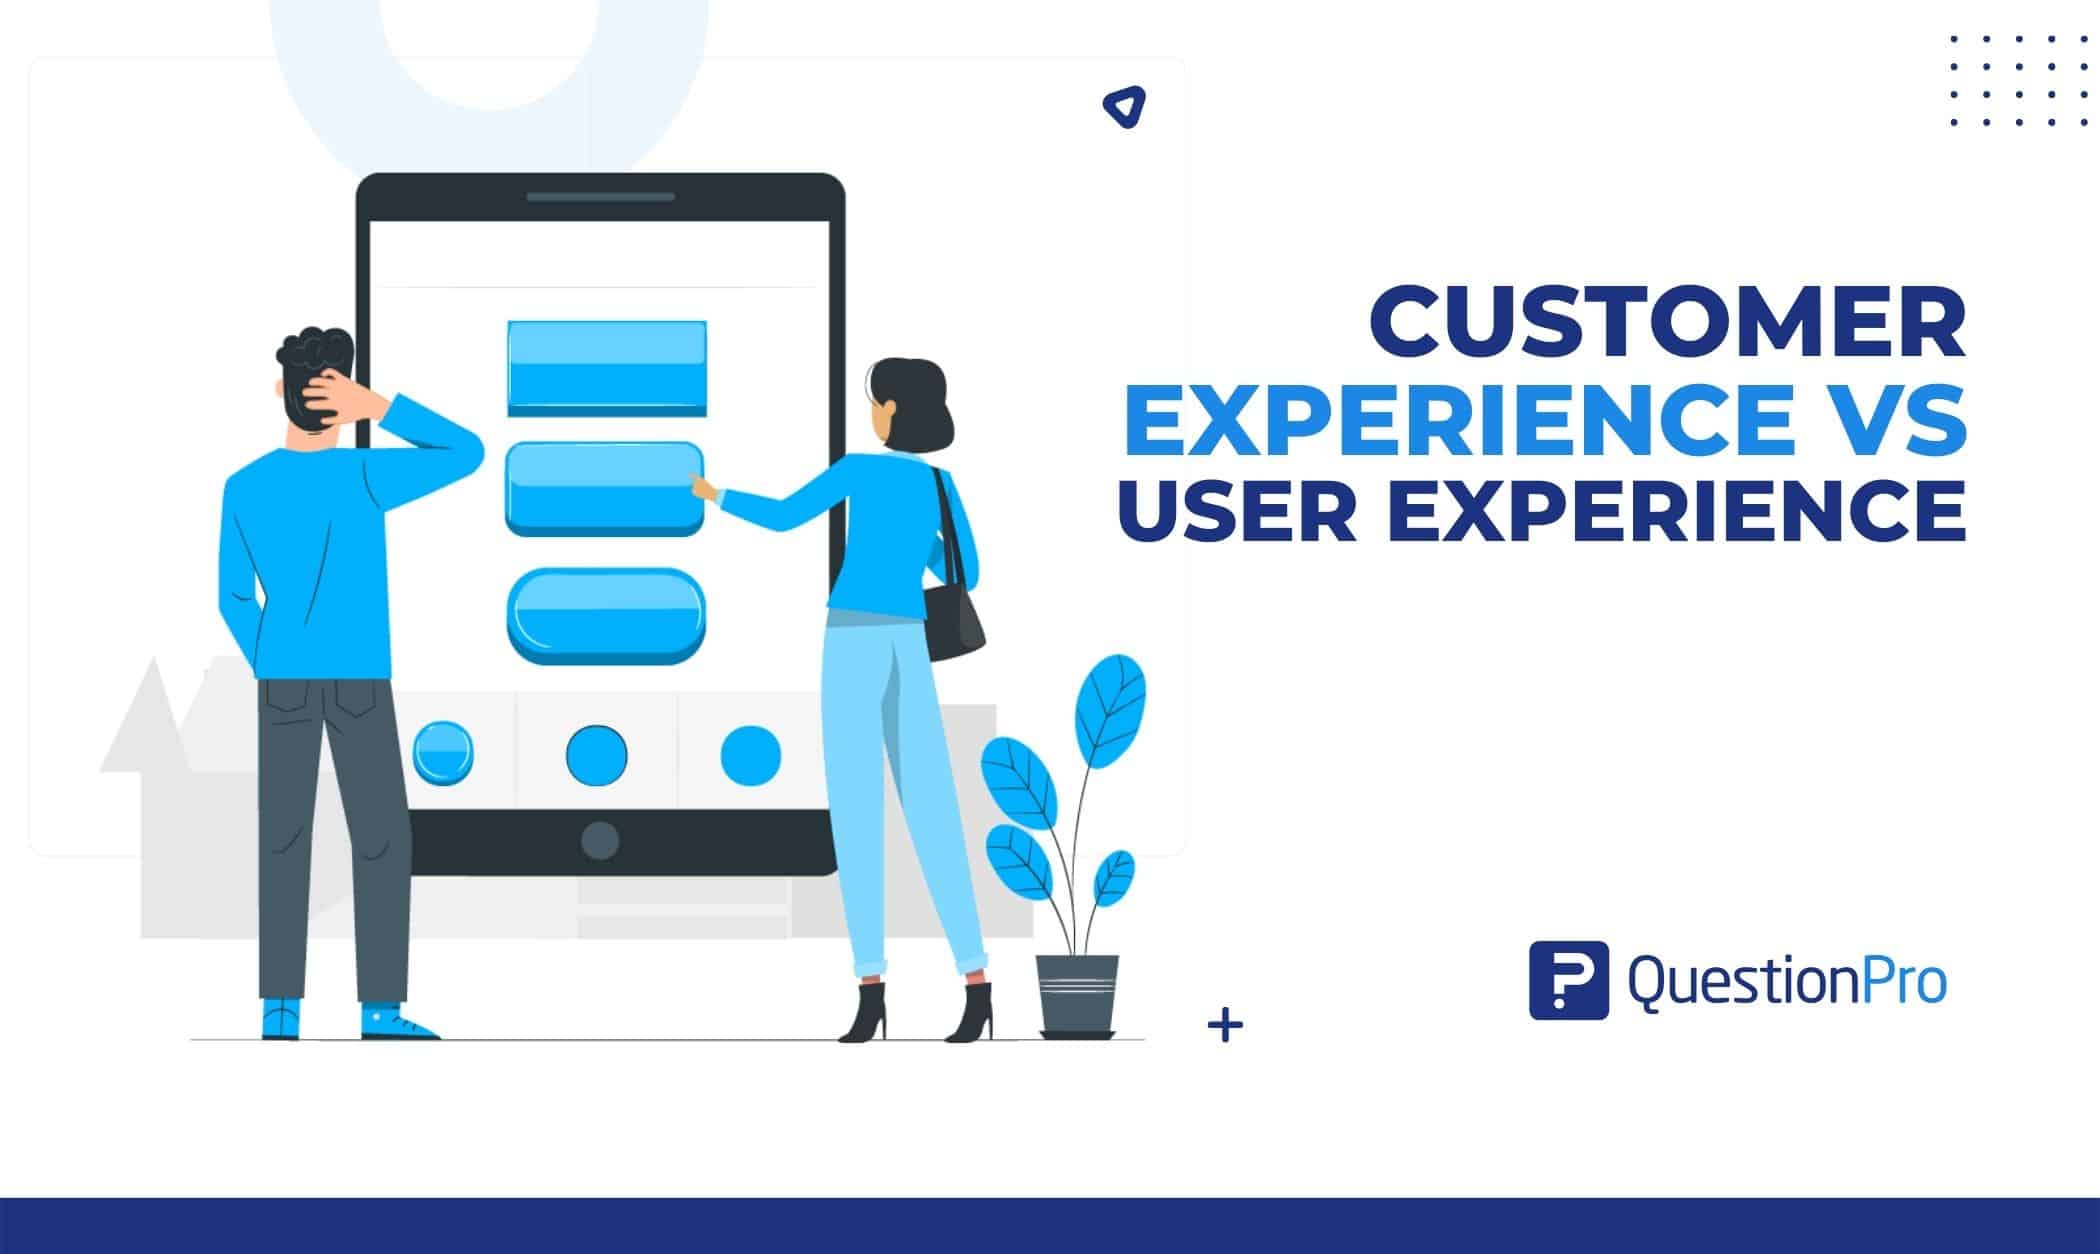 What is Customer experience vs user experience? Although they differ, they ensure customers have the best possible experiences. Learn more.